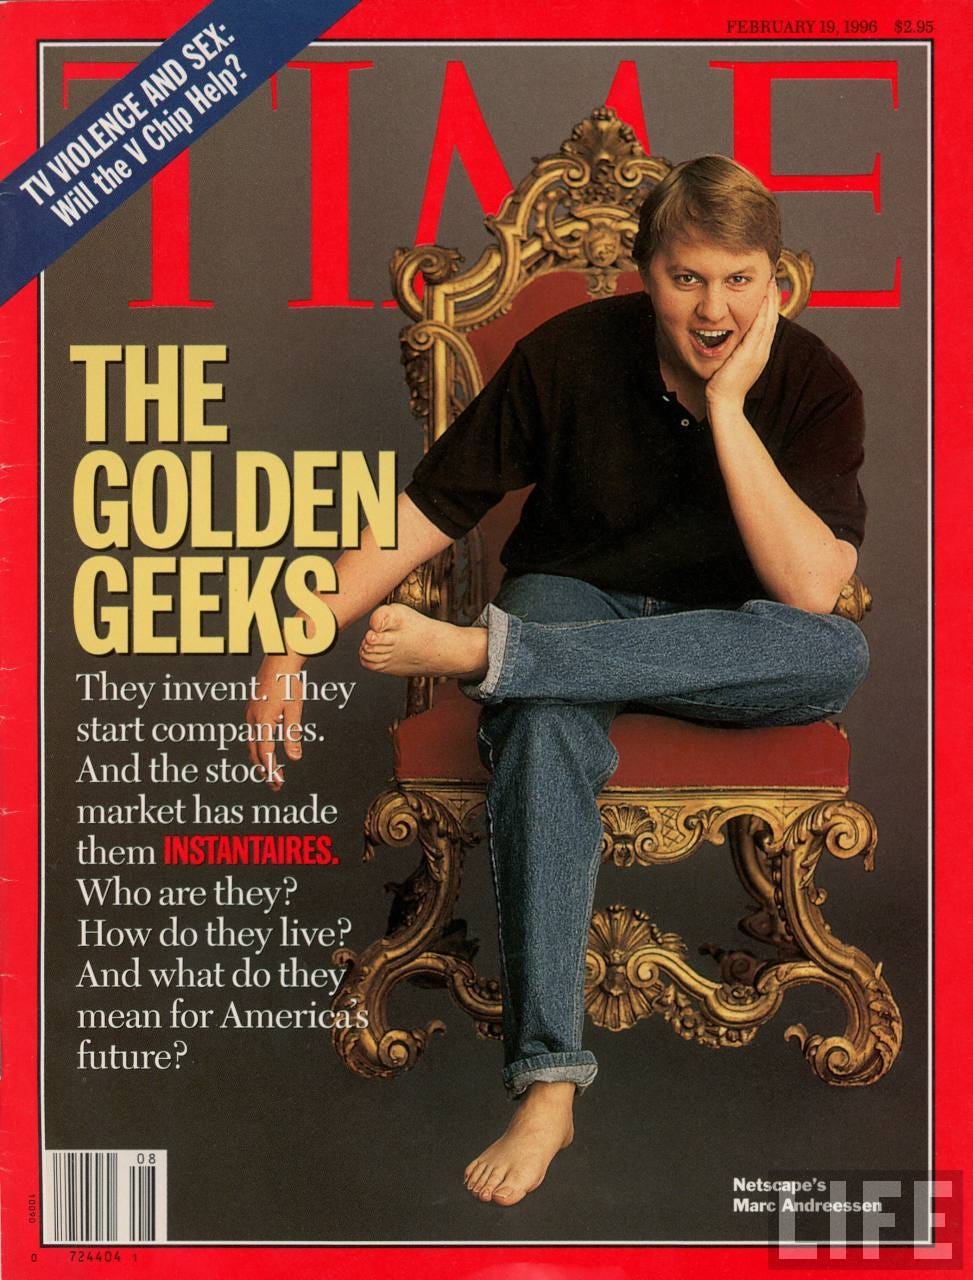 Marc Andreessen on the cover of TIME magazine in Feb 1996